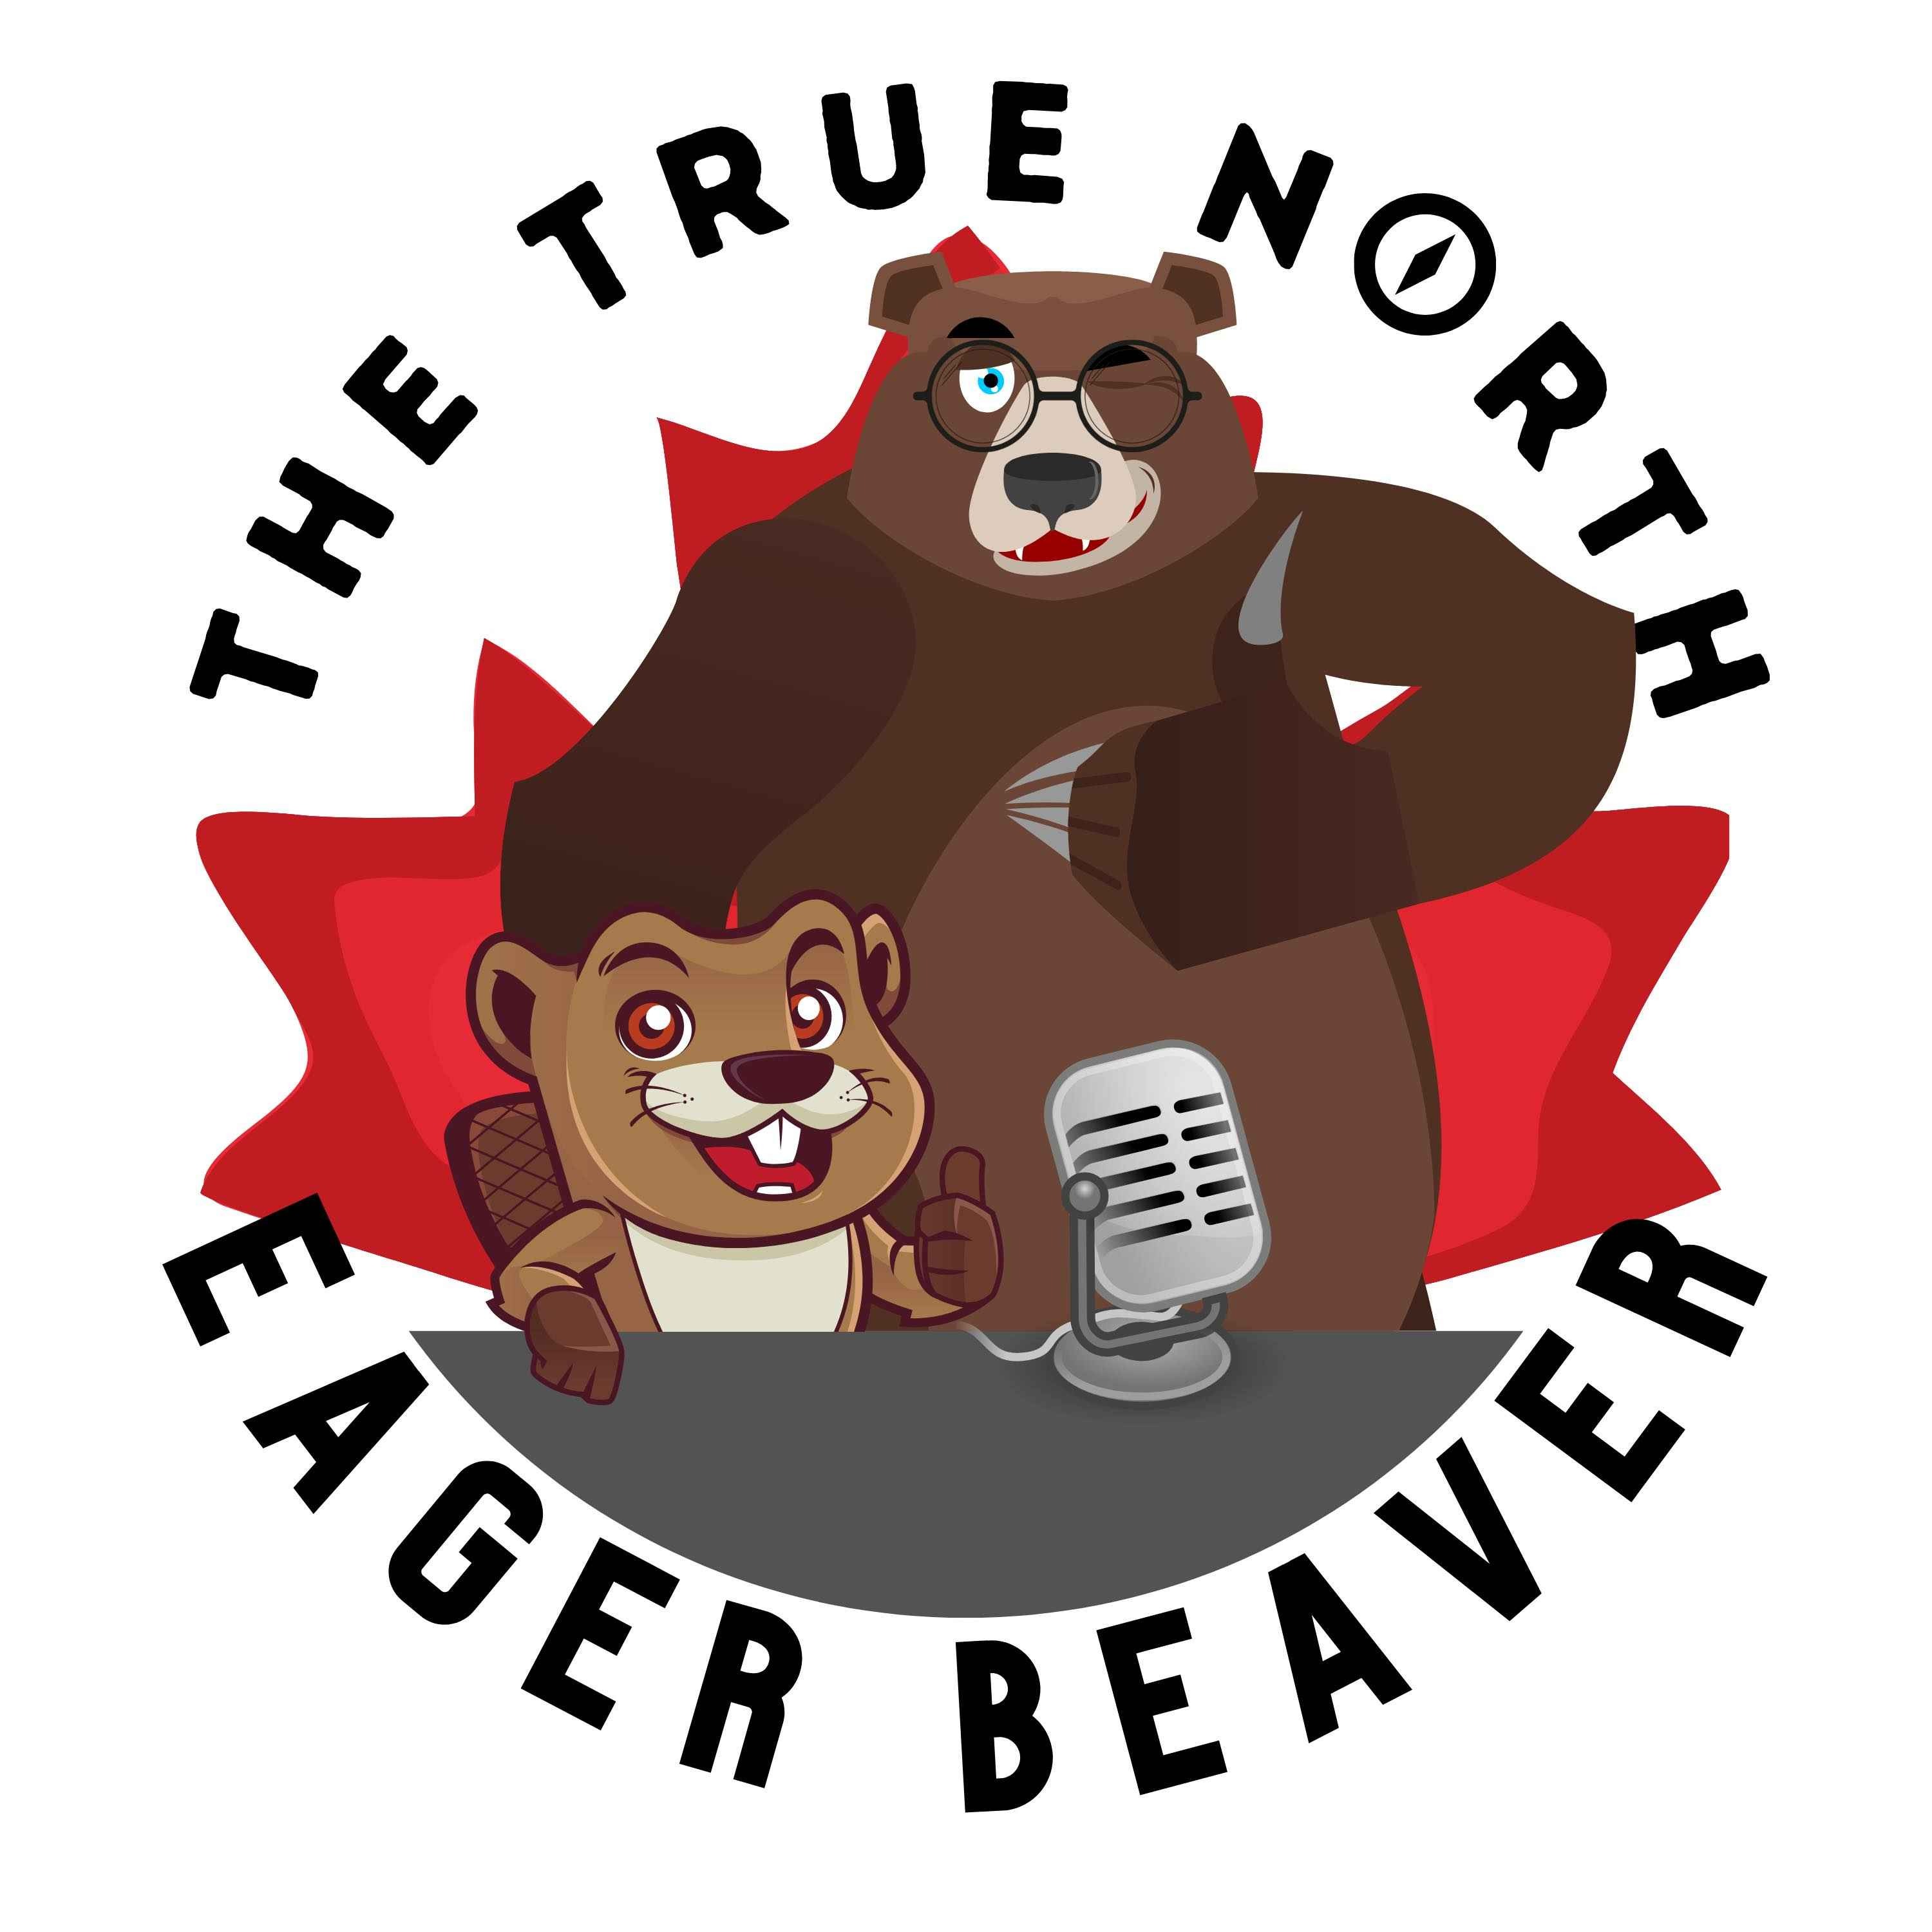 The Channel's Not Changing — The Daily Beaver Morning Show